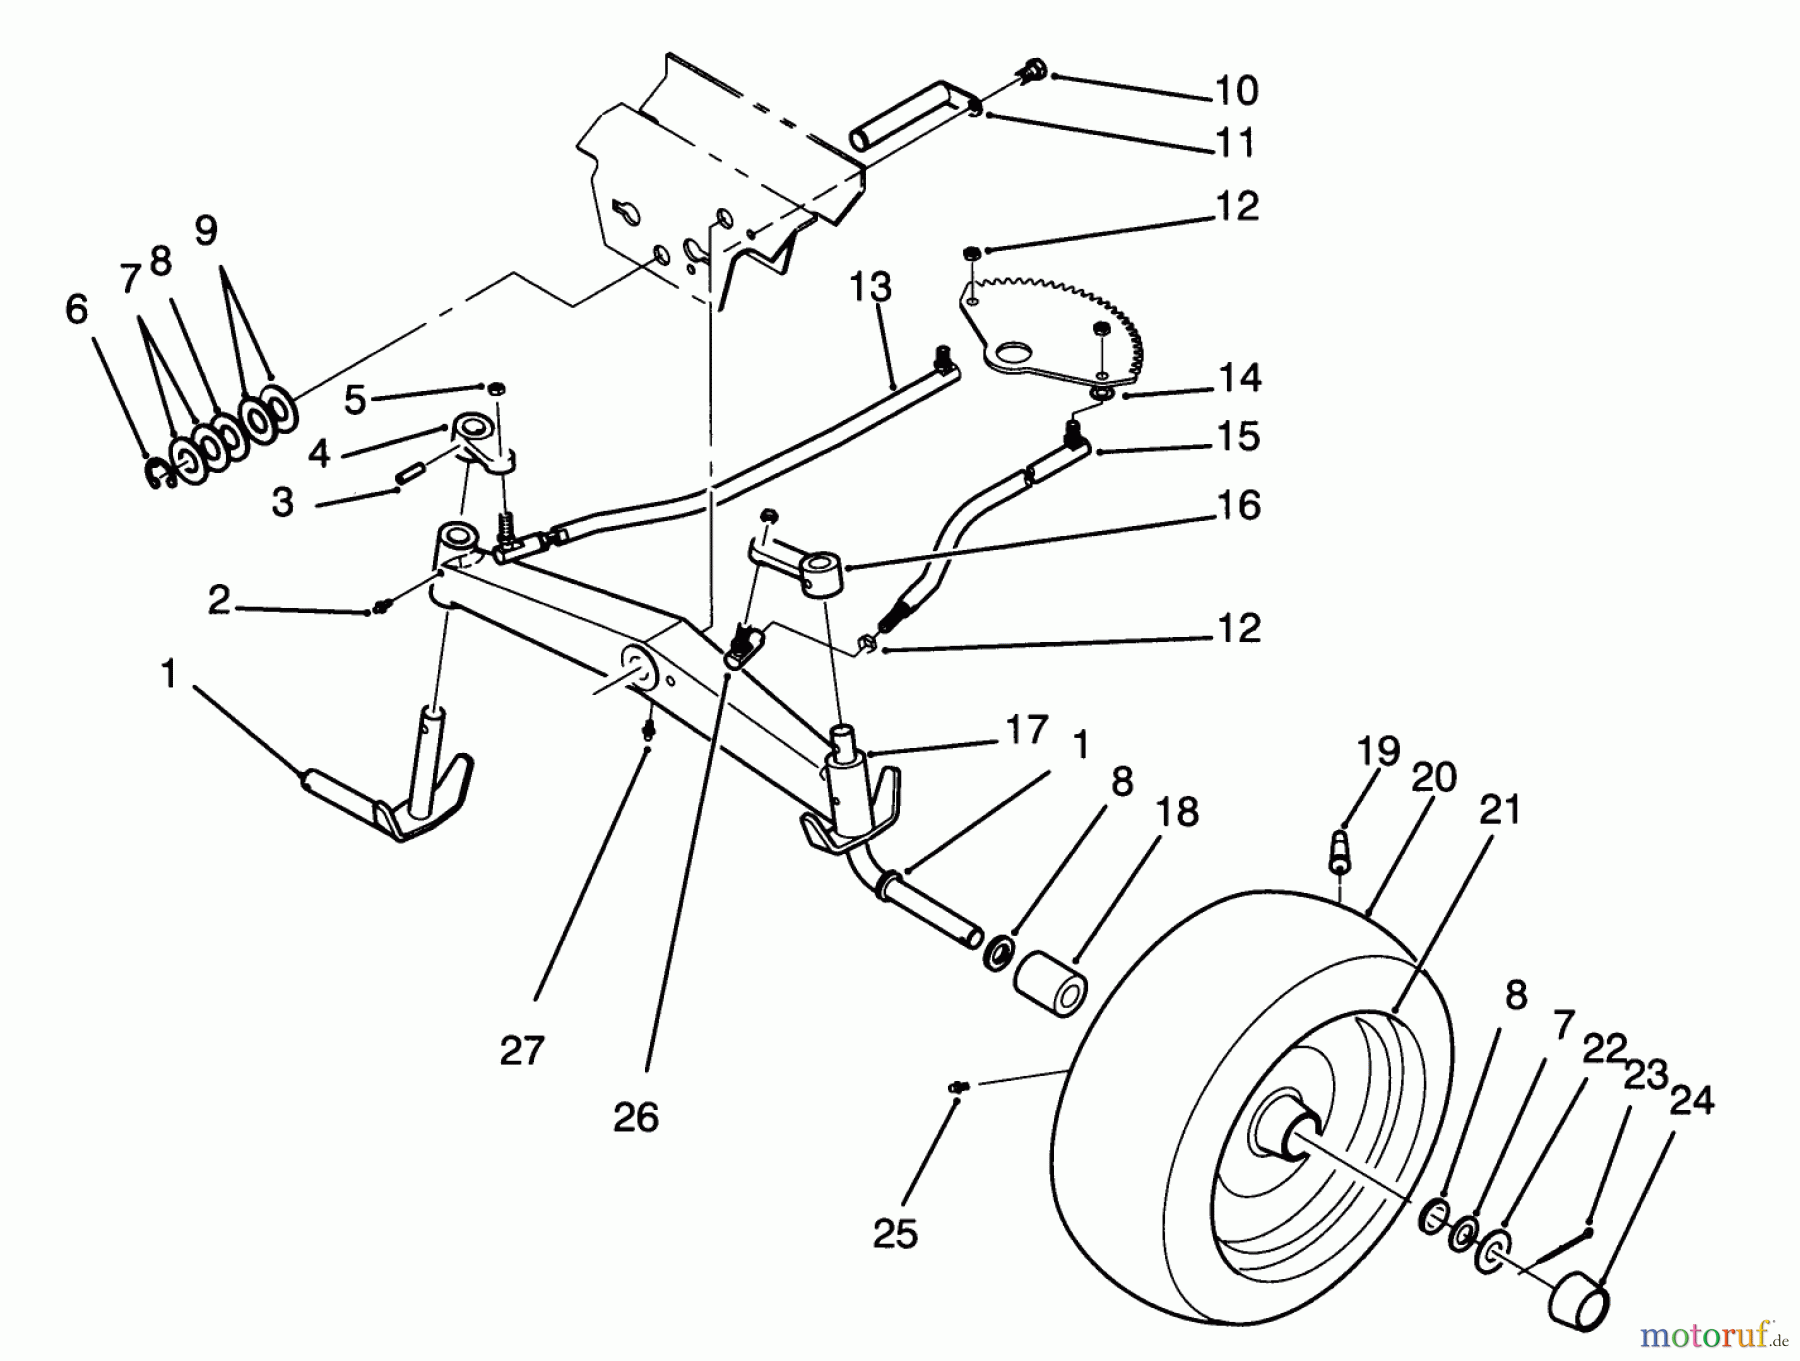  Toro Neu Mowers, Lawn & Garden Tractor Seite 1 72041 (244-H) - Toro 244-H Yard Tractor, 1993 (3900001-3999999) FRONT AXLE ASSEMBLY